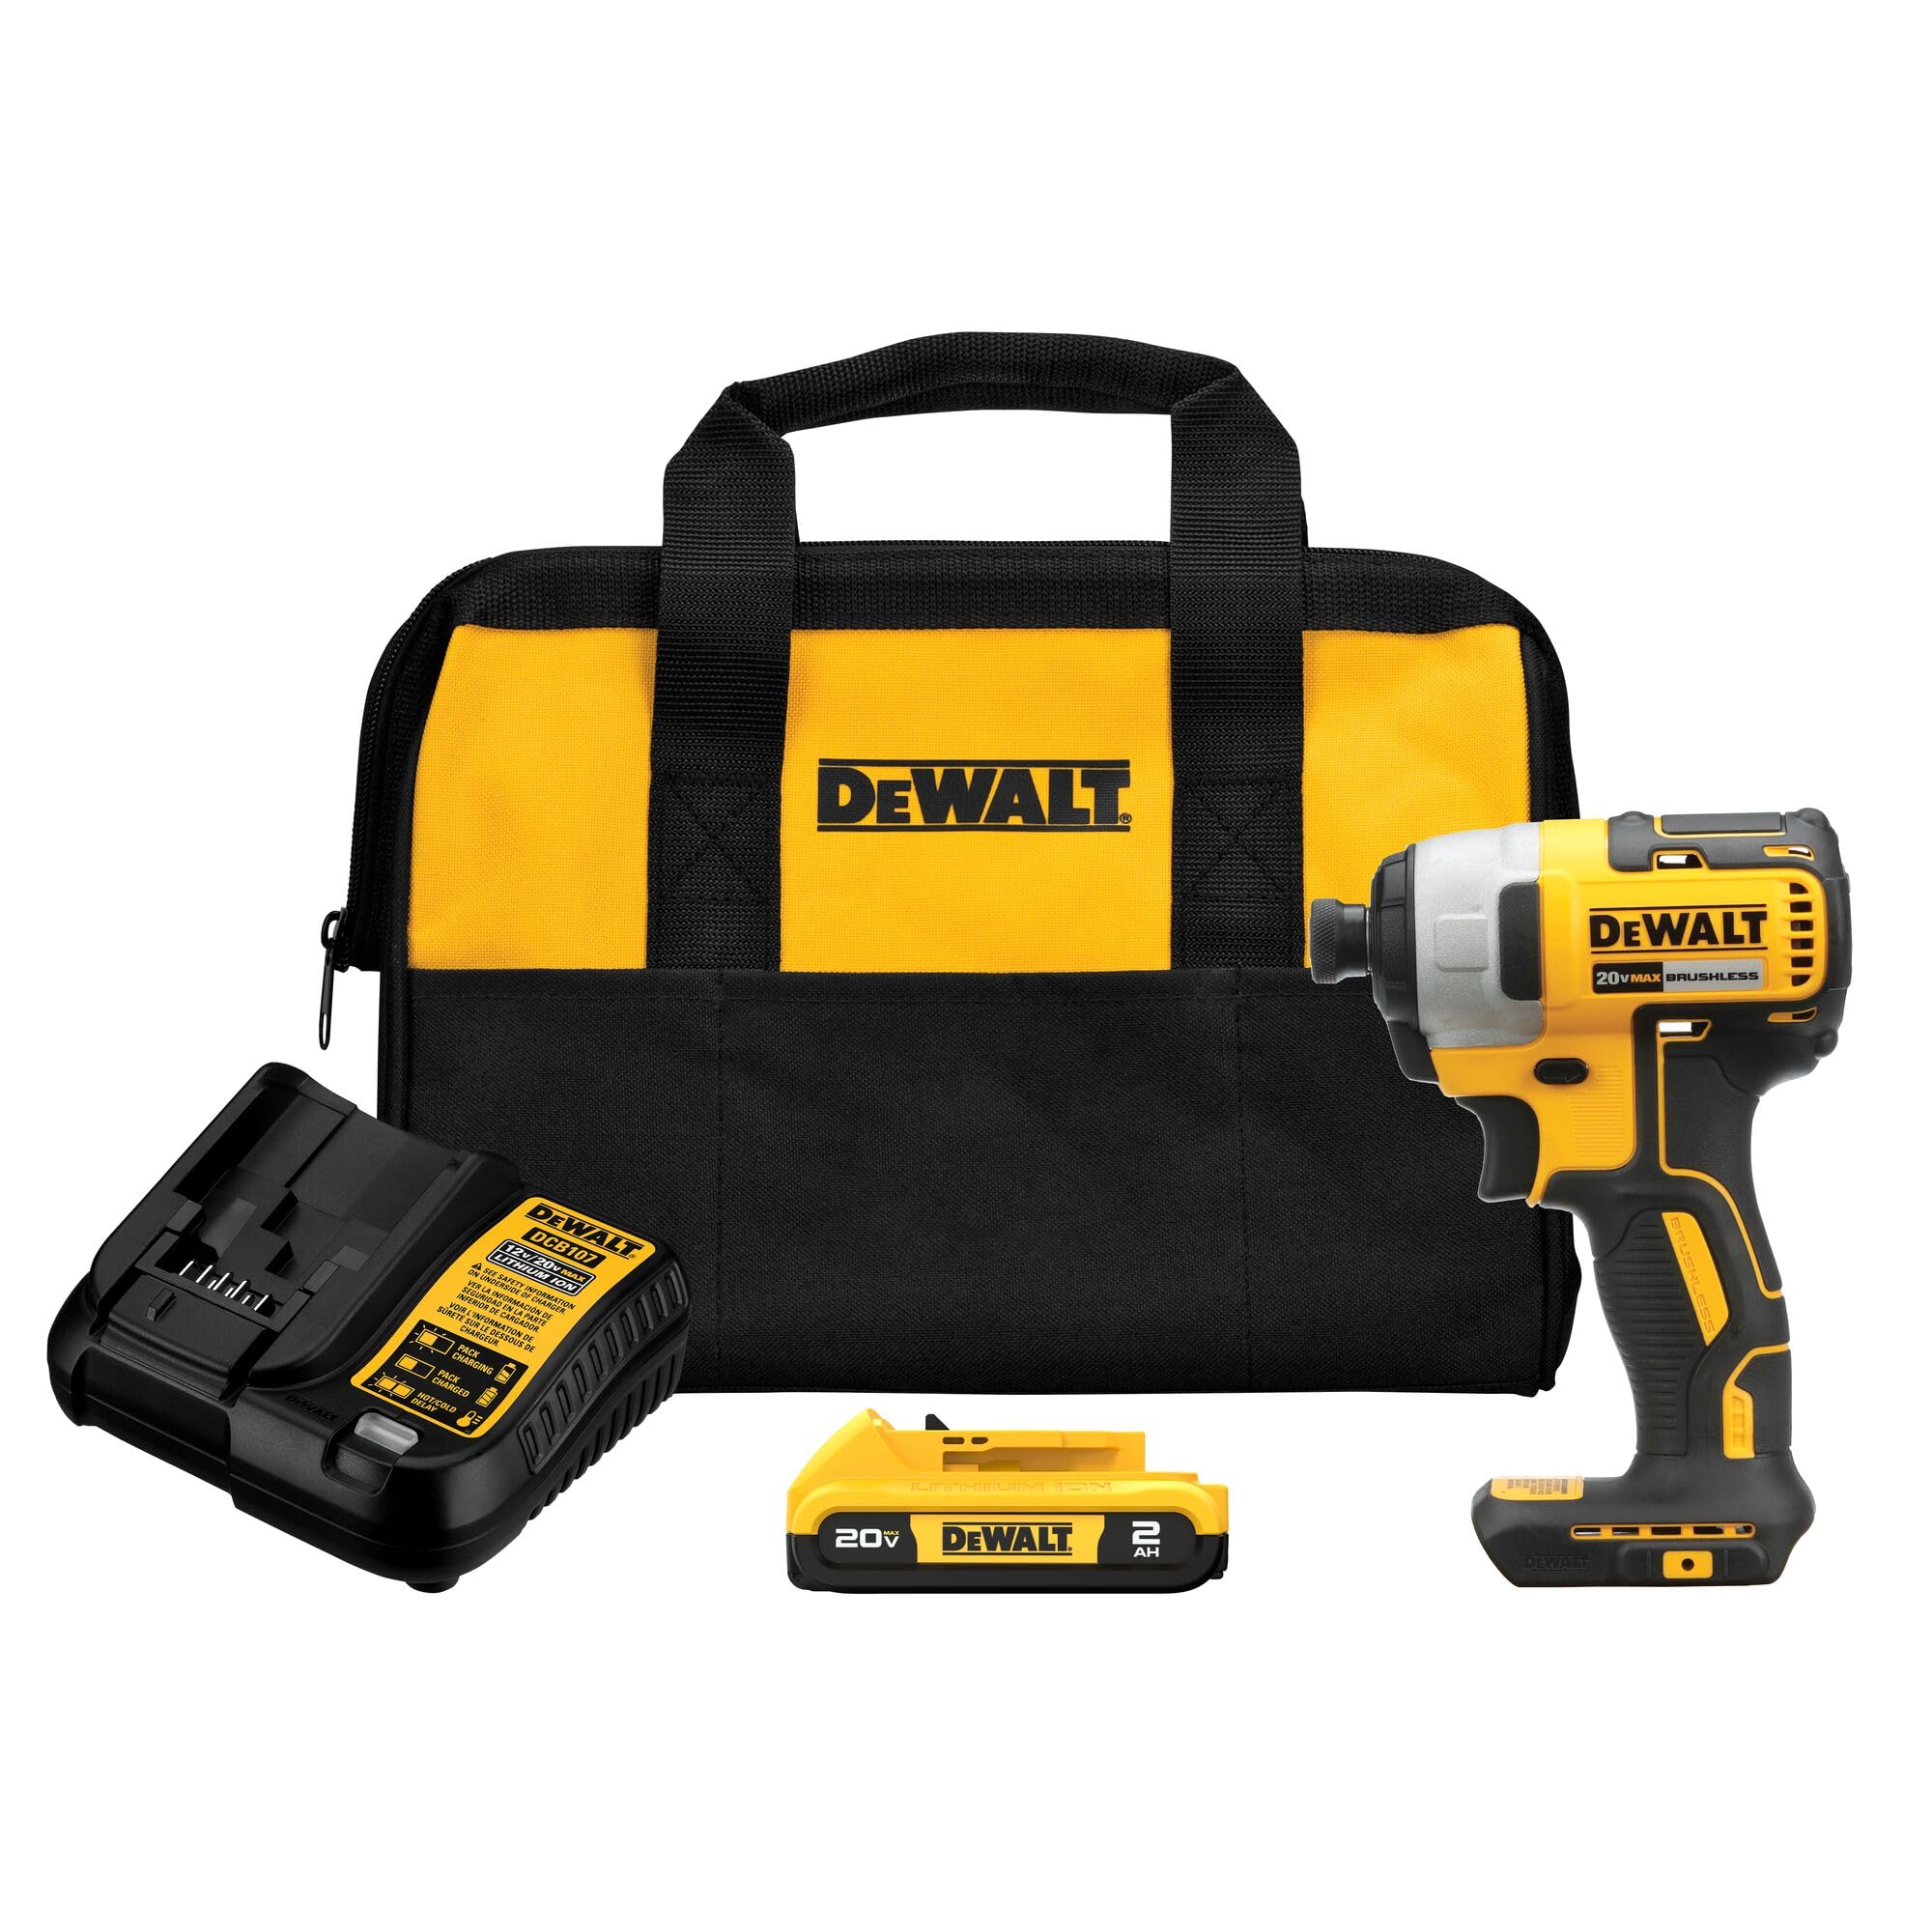 DEWALT 20V MAX Impact Driver, 1/4 Inch, Battery and Charger Included (DCF787D1) - Amazon.com $100